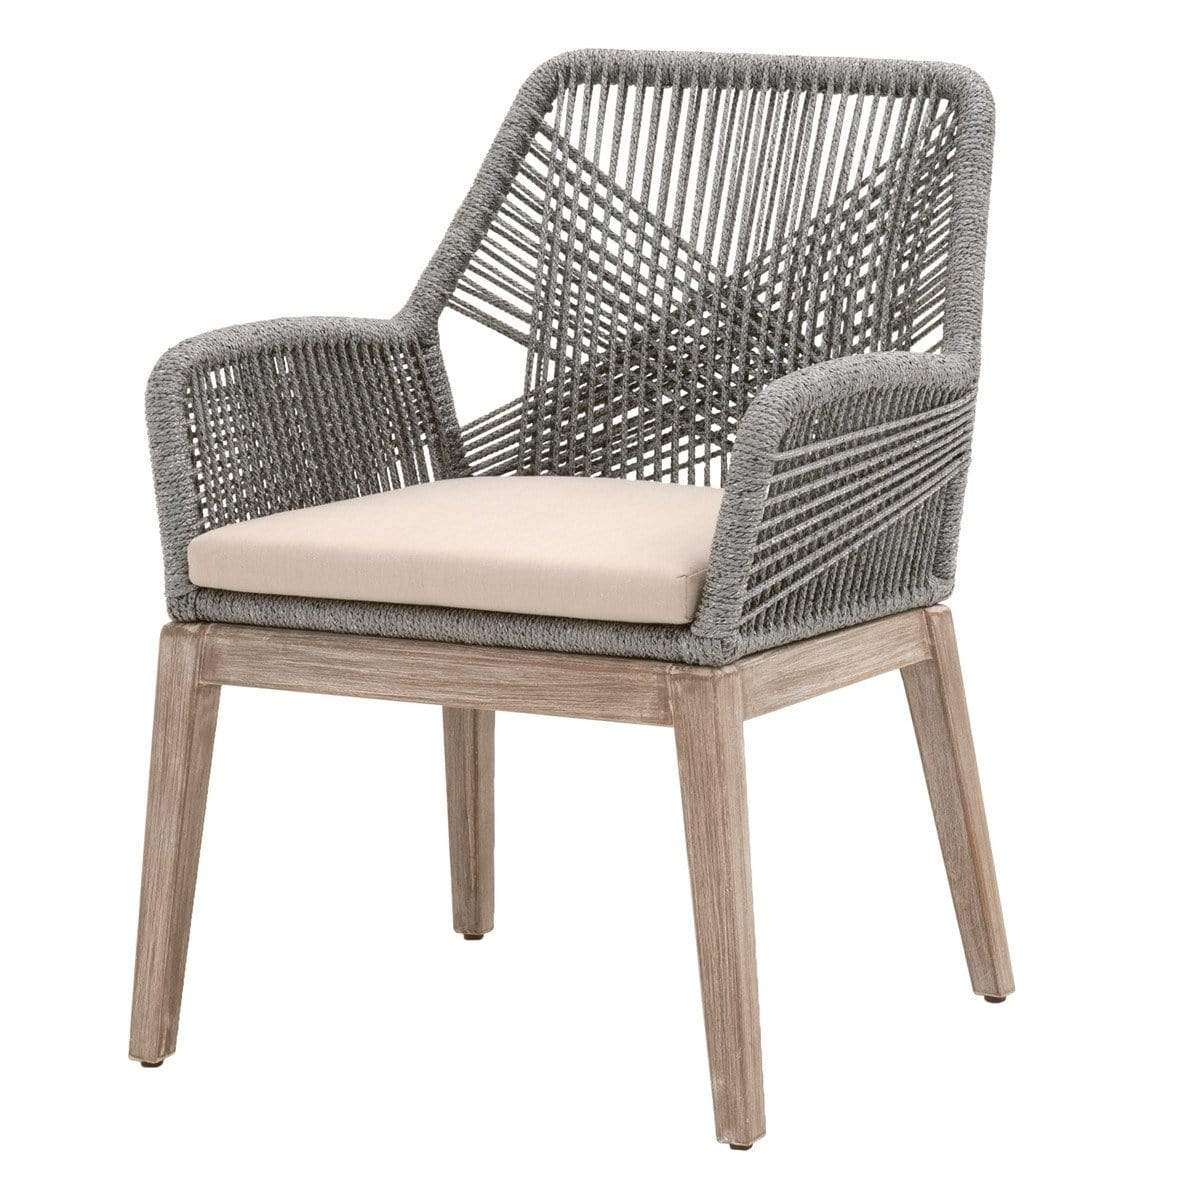 BLU Home Loom Arm Chair - Platinum (Set of 2) Furniture orient-express-6809KD.PLA/LGRY/NG 00842279106706